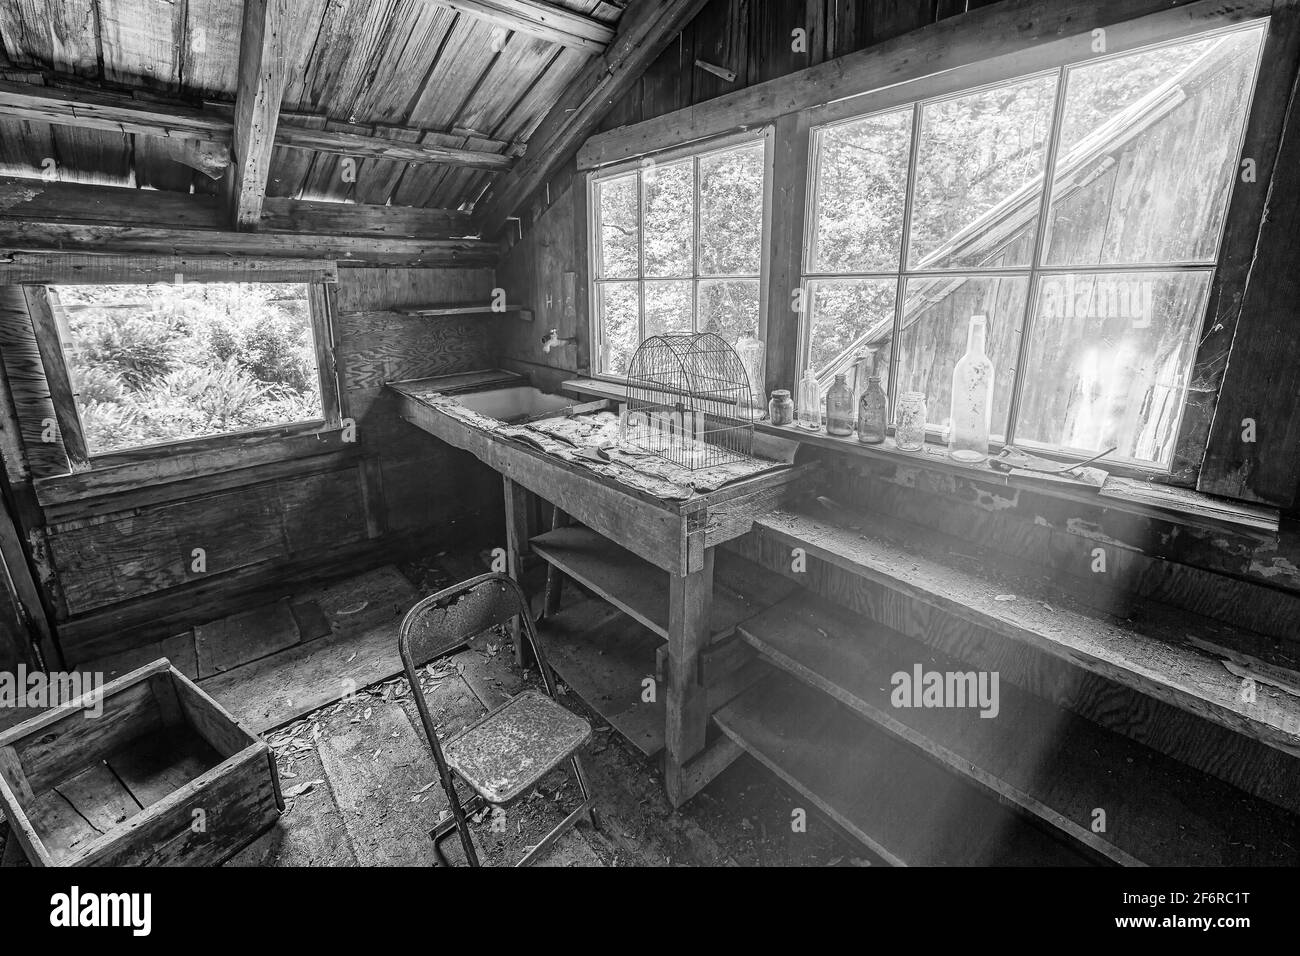 Black and white image of the interior of an abandoned cabin with sunrays. Stock Photo